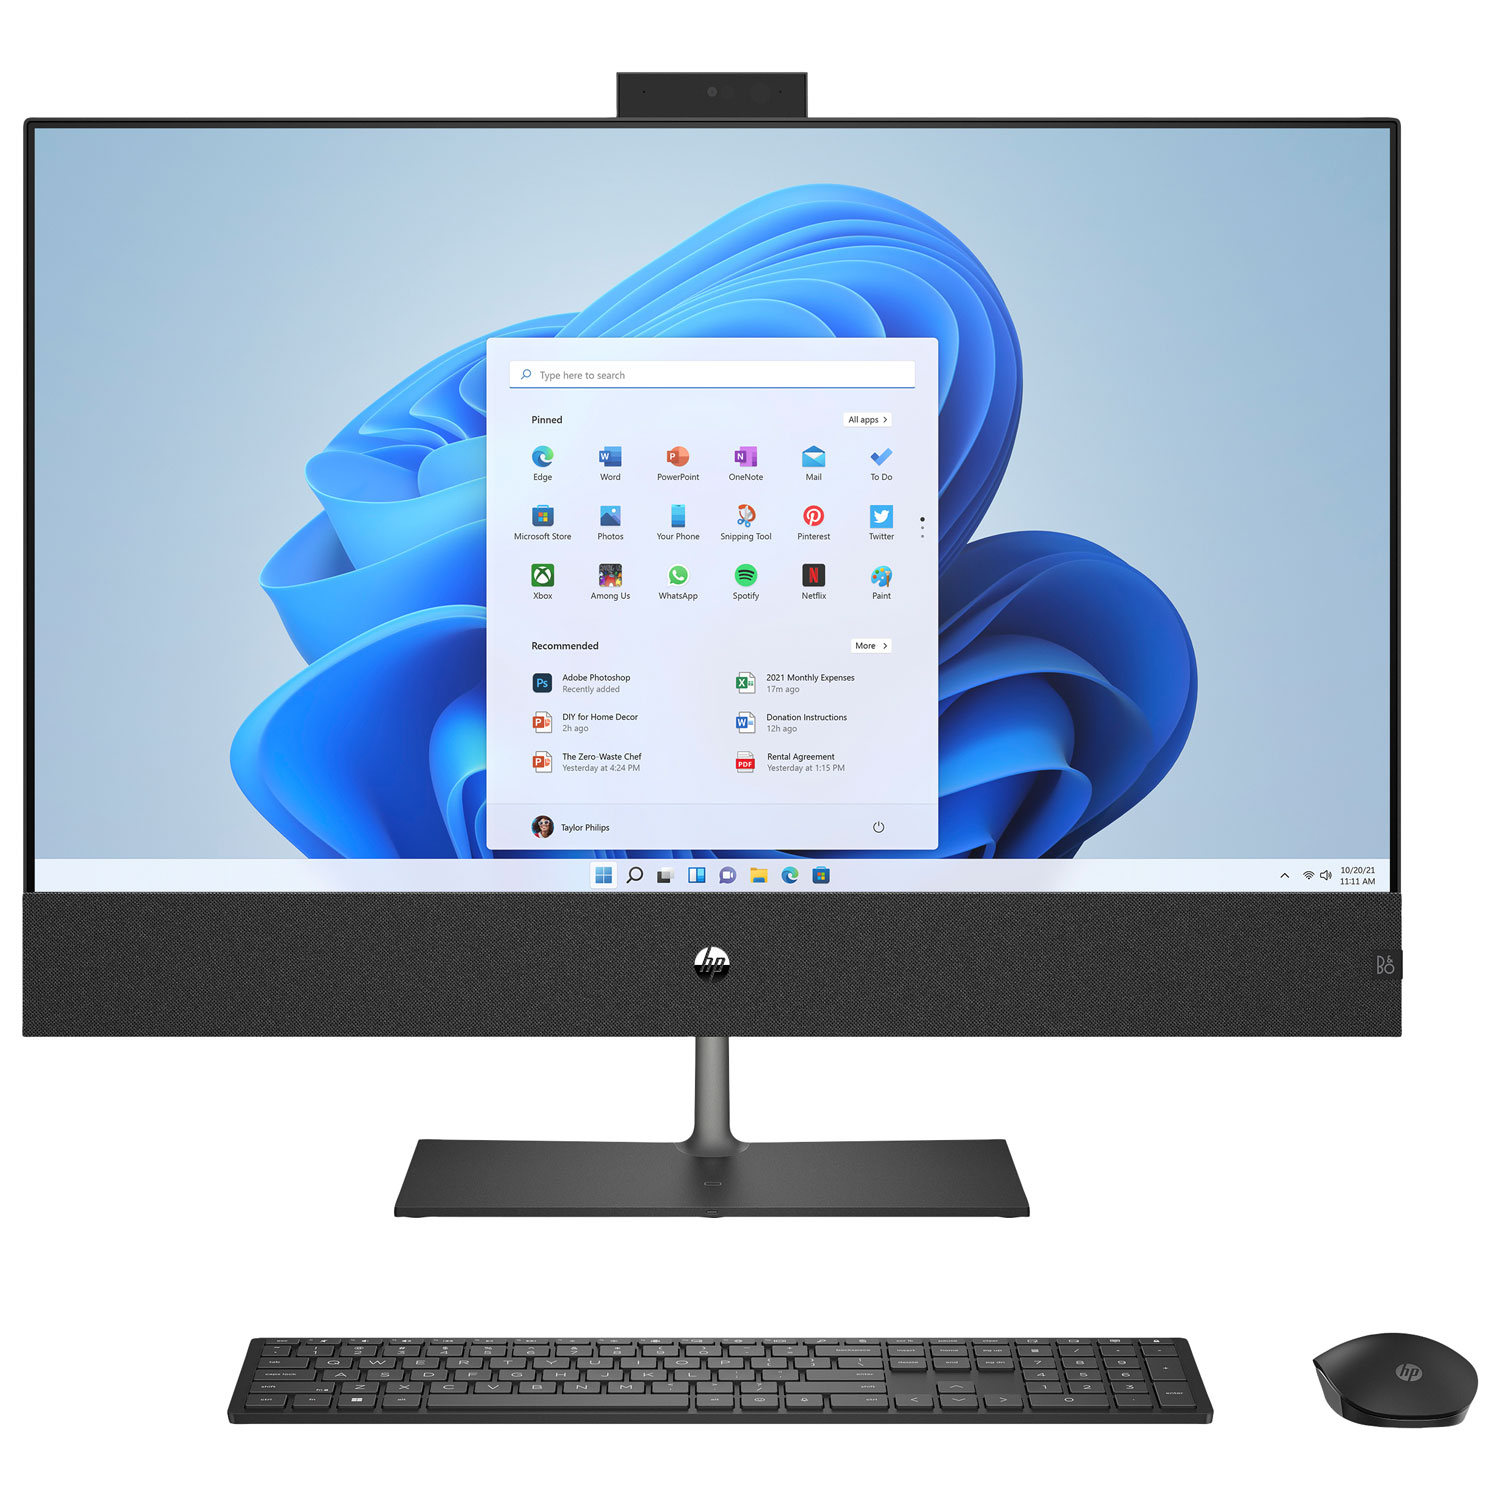 HP Pavilion All-in-One PC (Intel Core i7-13700T/512GB SSD/16GB RAM) - Only at Best Buy